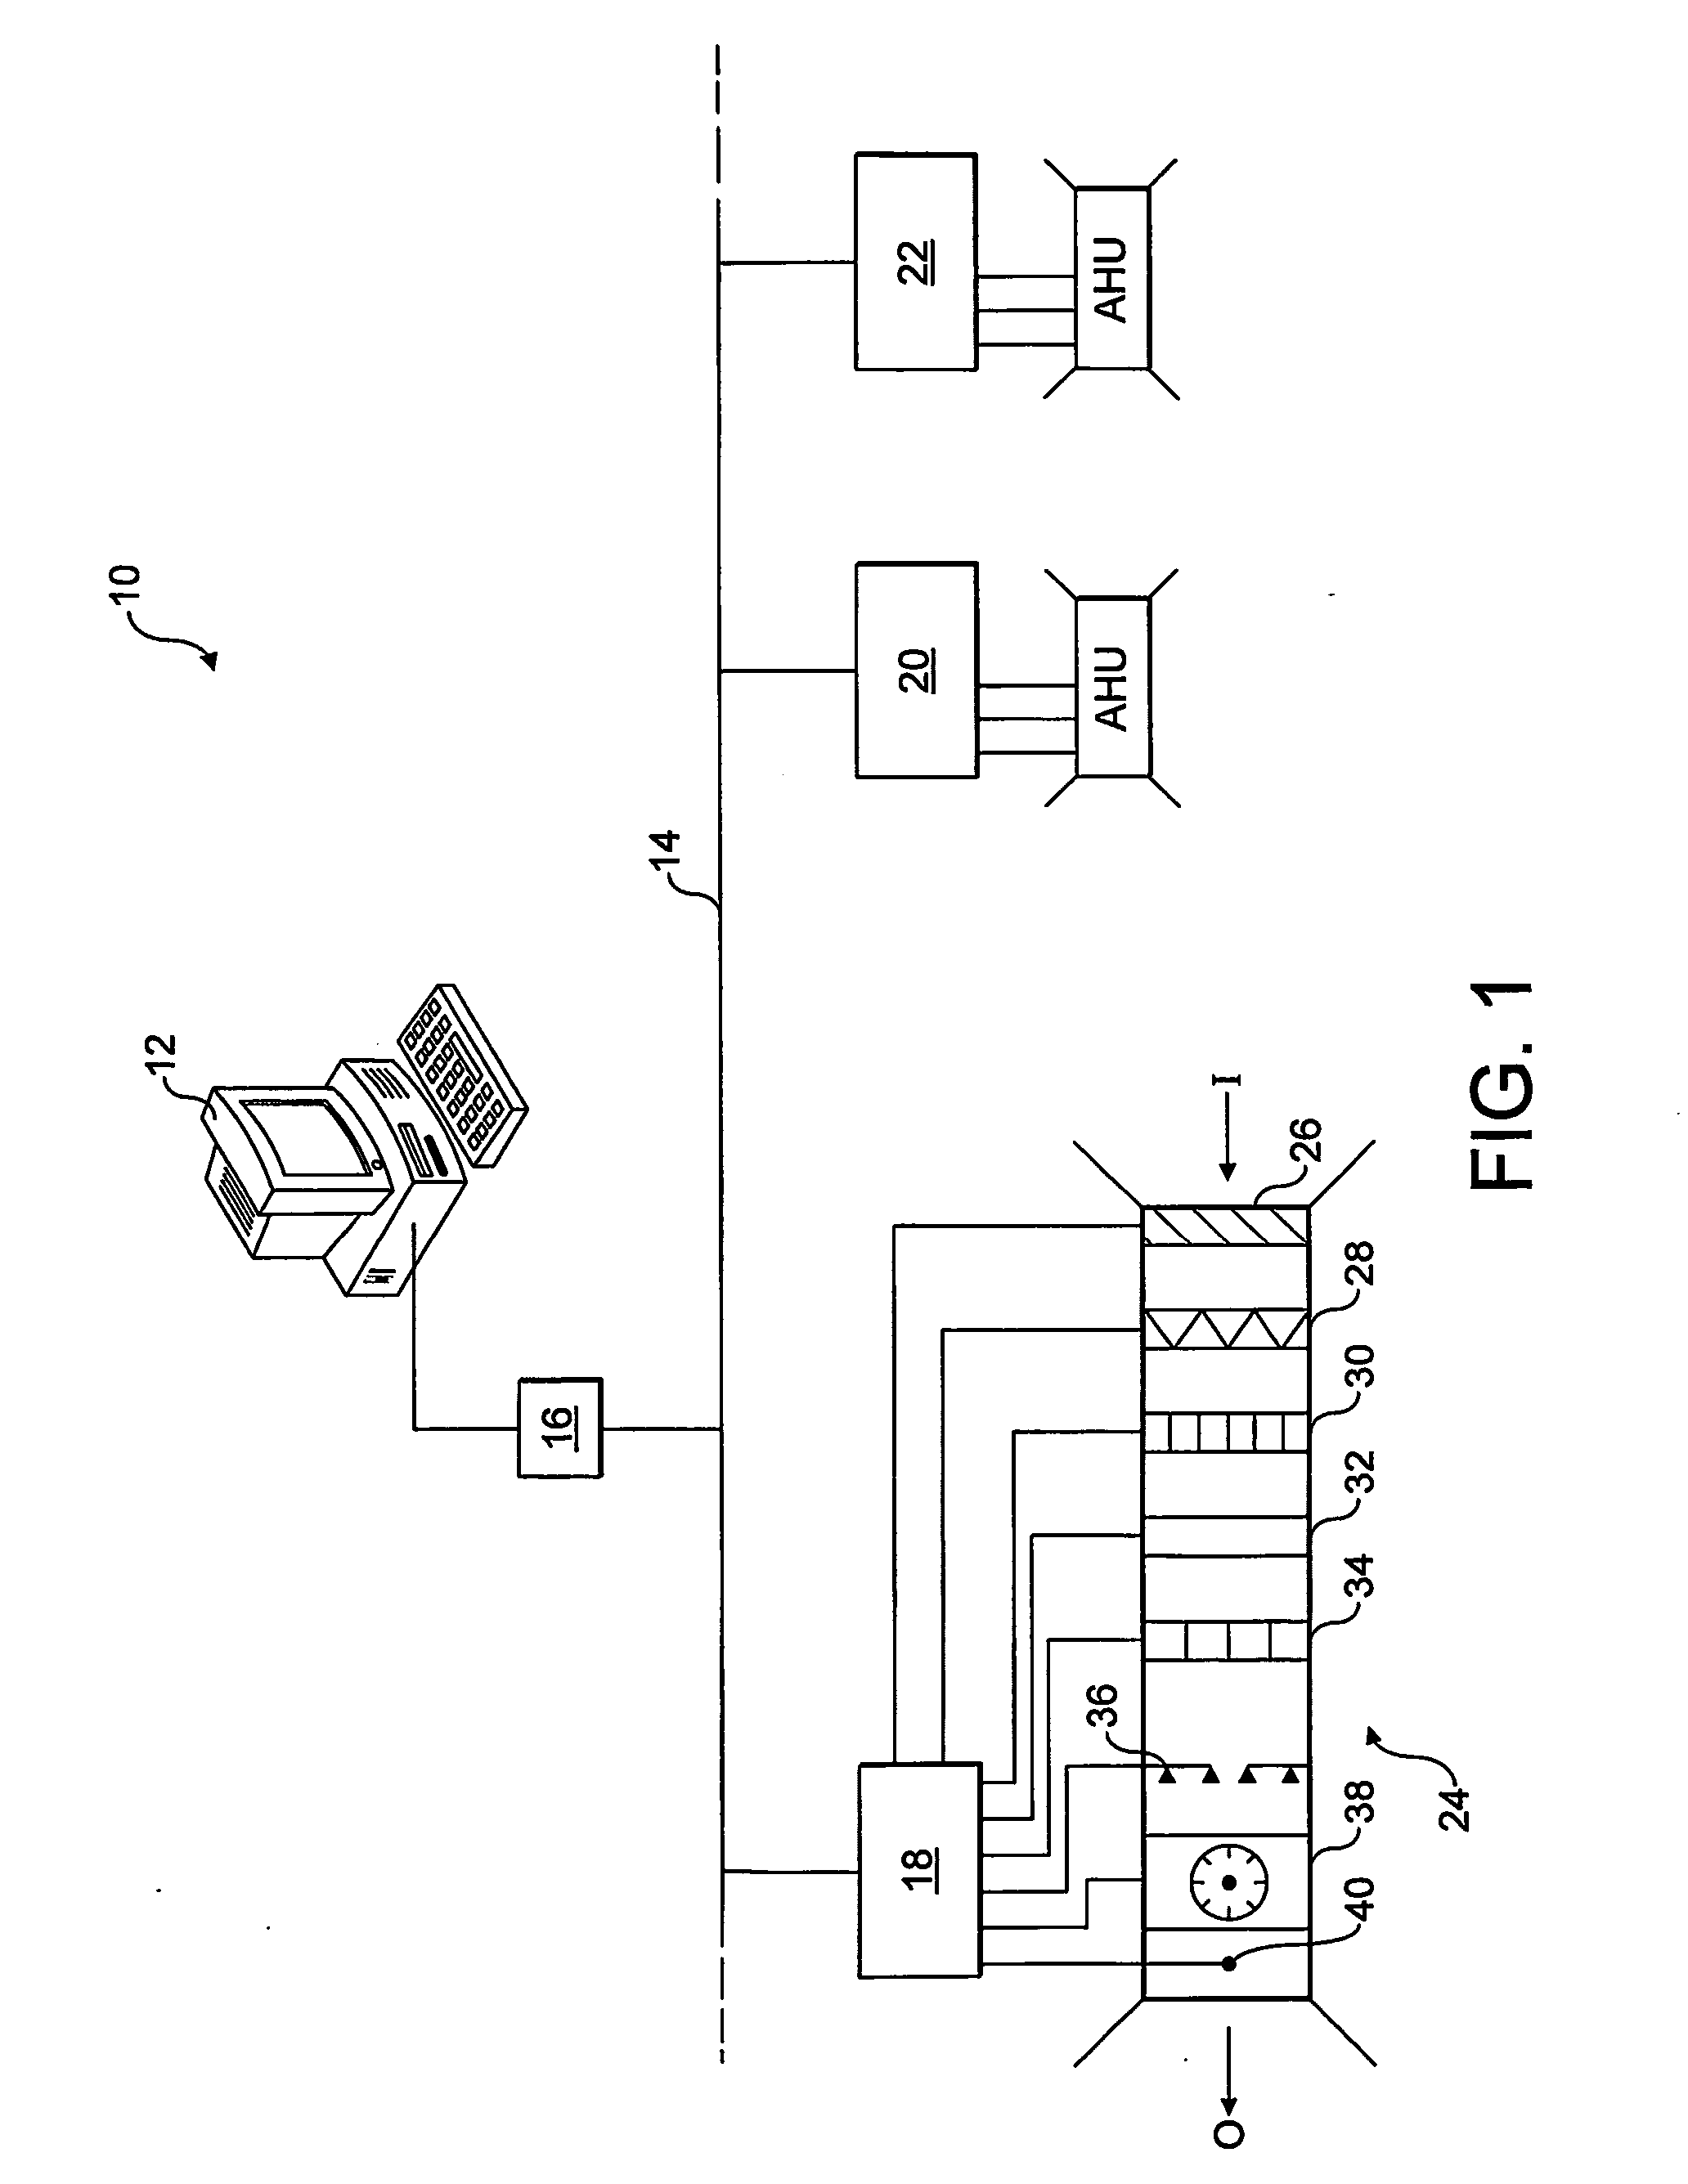 Control method and apparatus for an air conditioner using occupant feedback